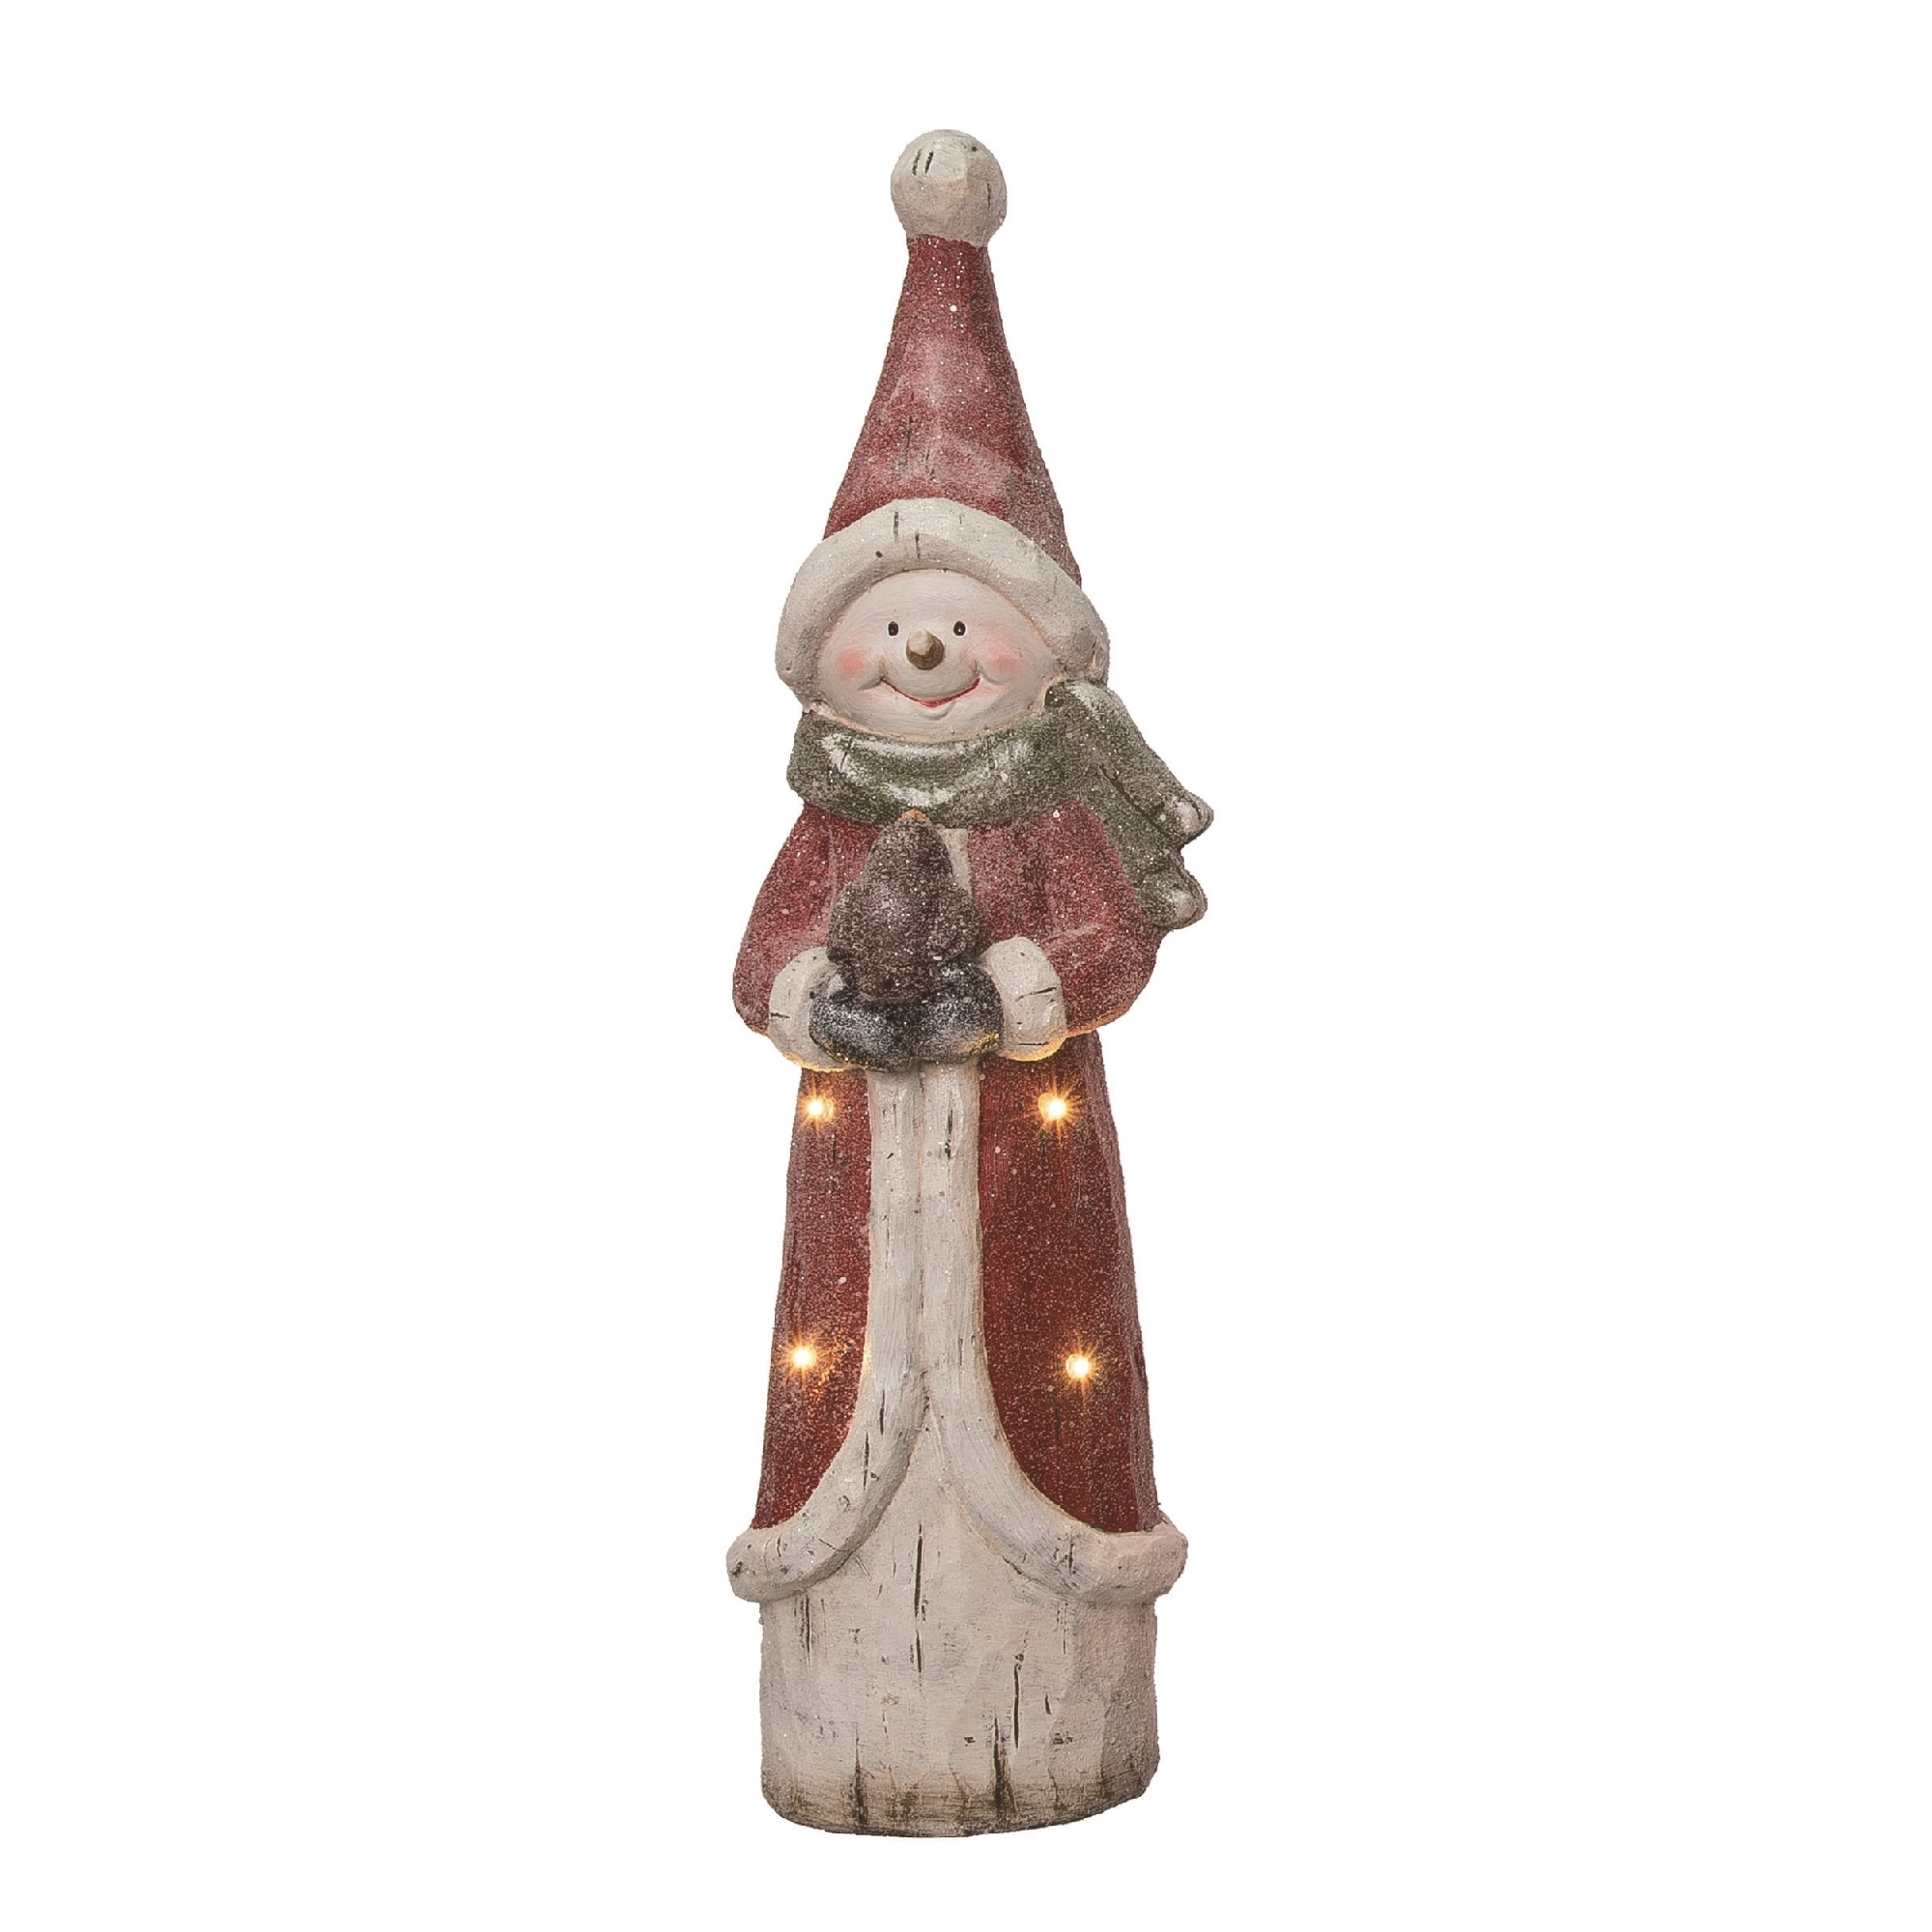 Contemporary Home Living 2' Pre-Lit Red and White Snowman Christmas Tabletop Figurine